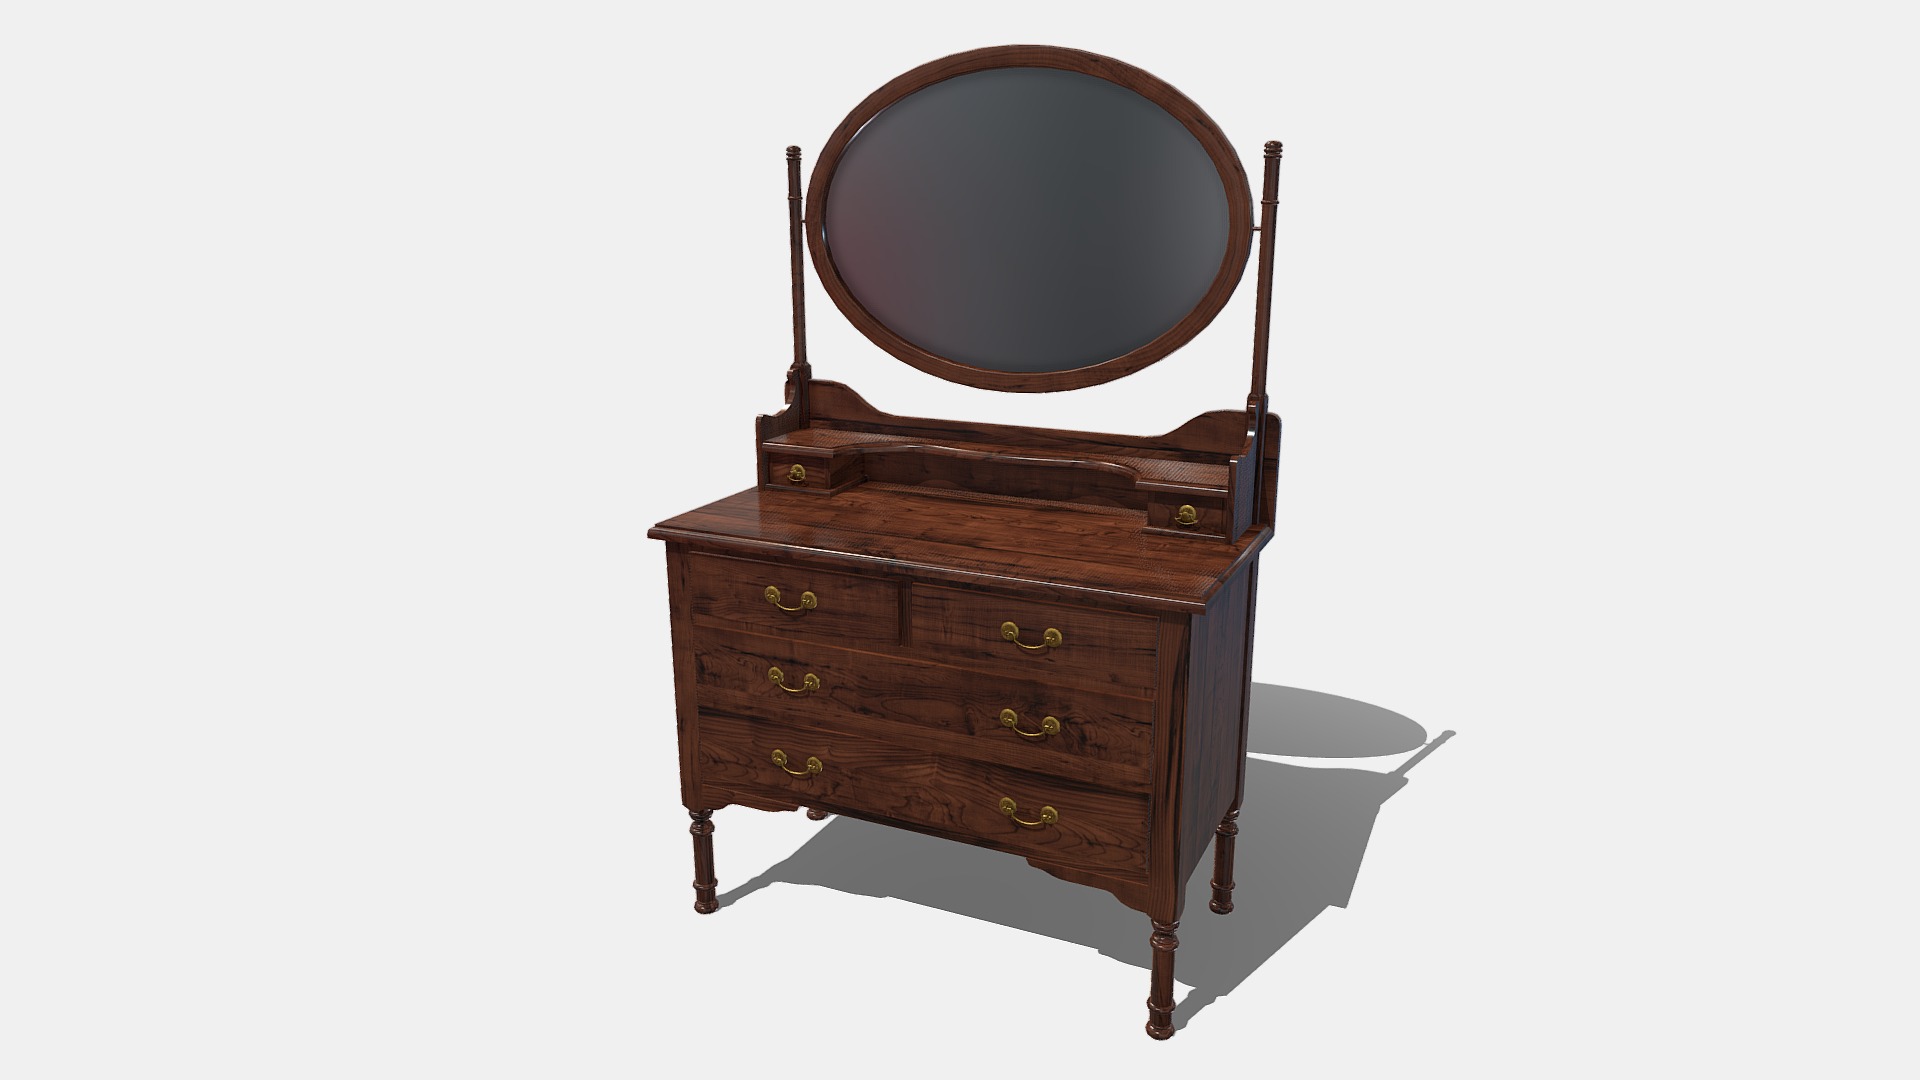 3D model Vanity Chest - This is a 3D model of the Vanity Chest. The 3D model is about a wooden chest with a mirror on top.